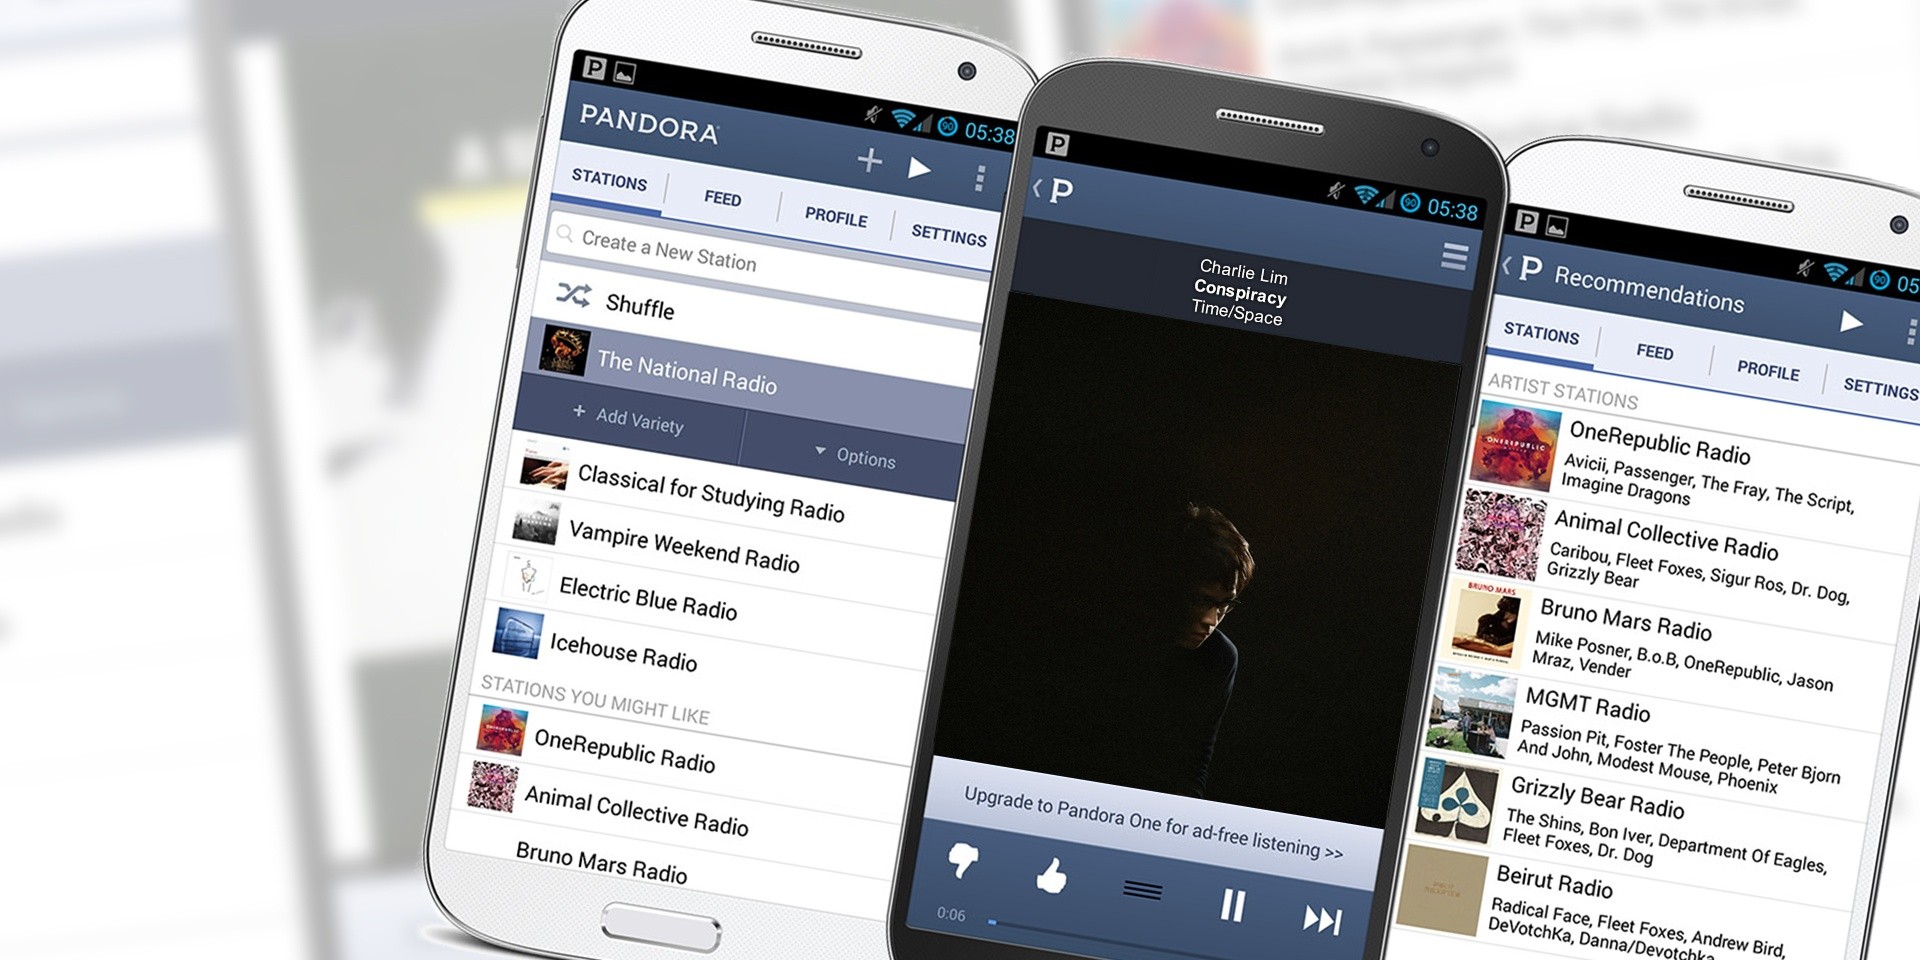 Singapore music will get a boost in the US with streaming service Pandora